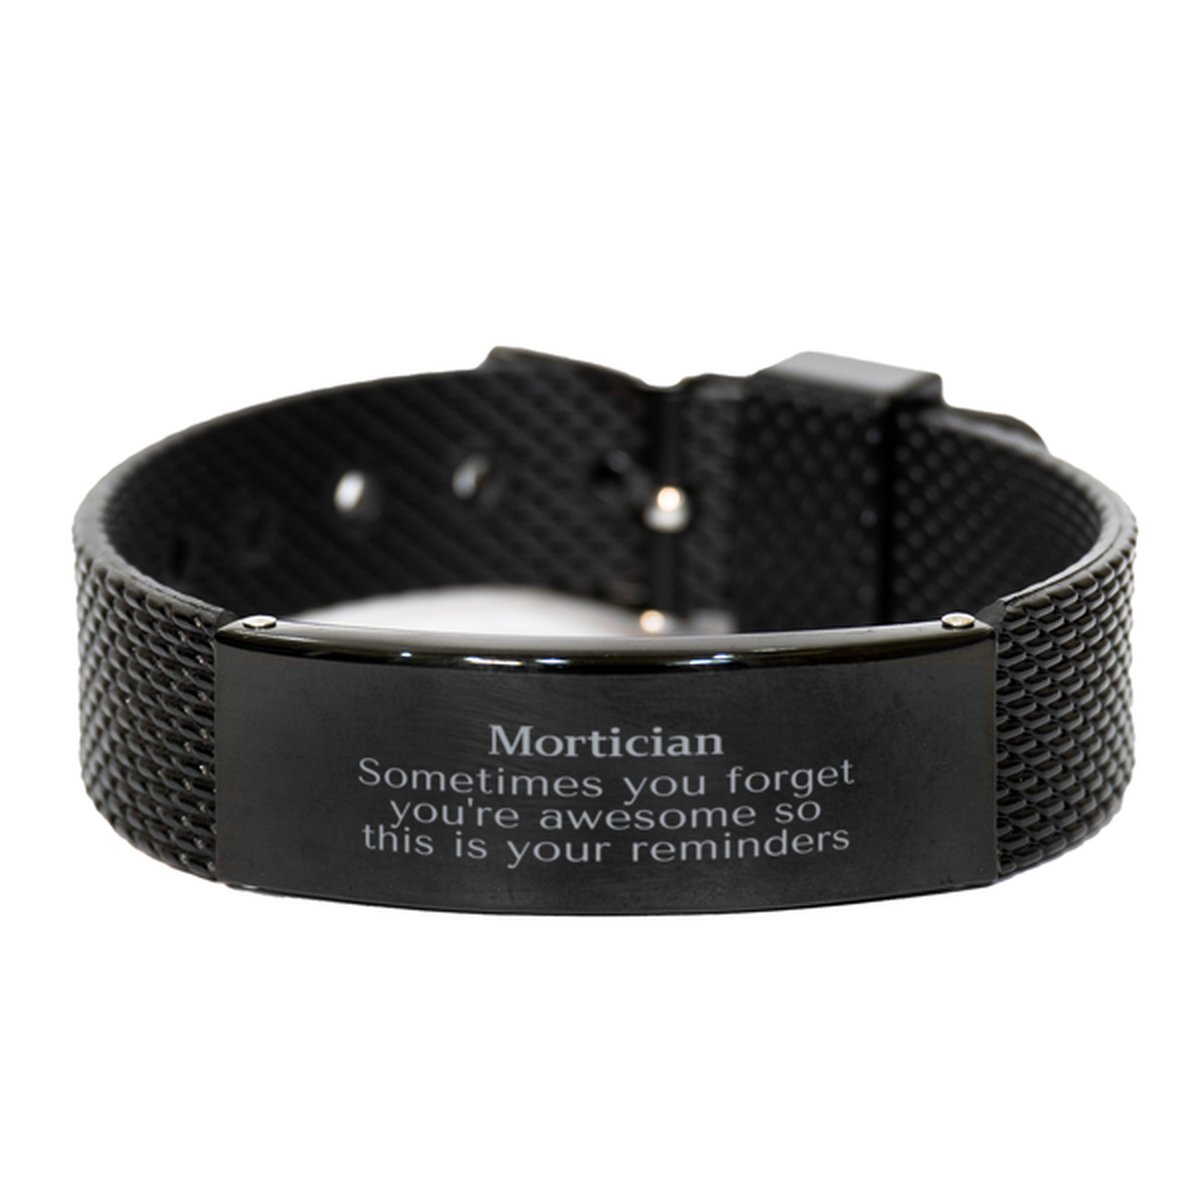 Sentimental Mortician Black Shark Mesh Bracelet, Mortician Sometimes you forget you're awesome so this is your reminders, Graduation Christmas Birthday Gifts for Mortician, Men, Women, Coworkers